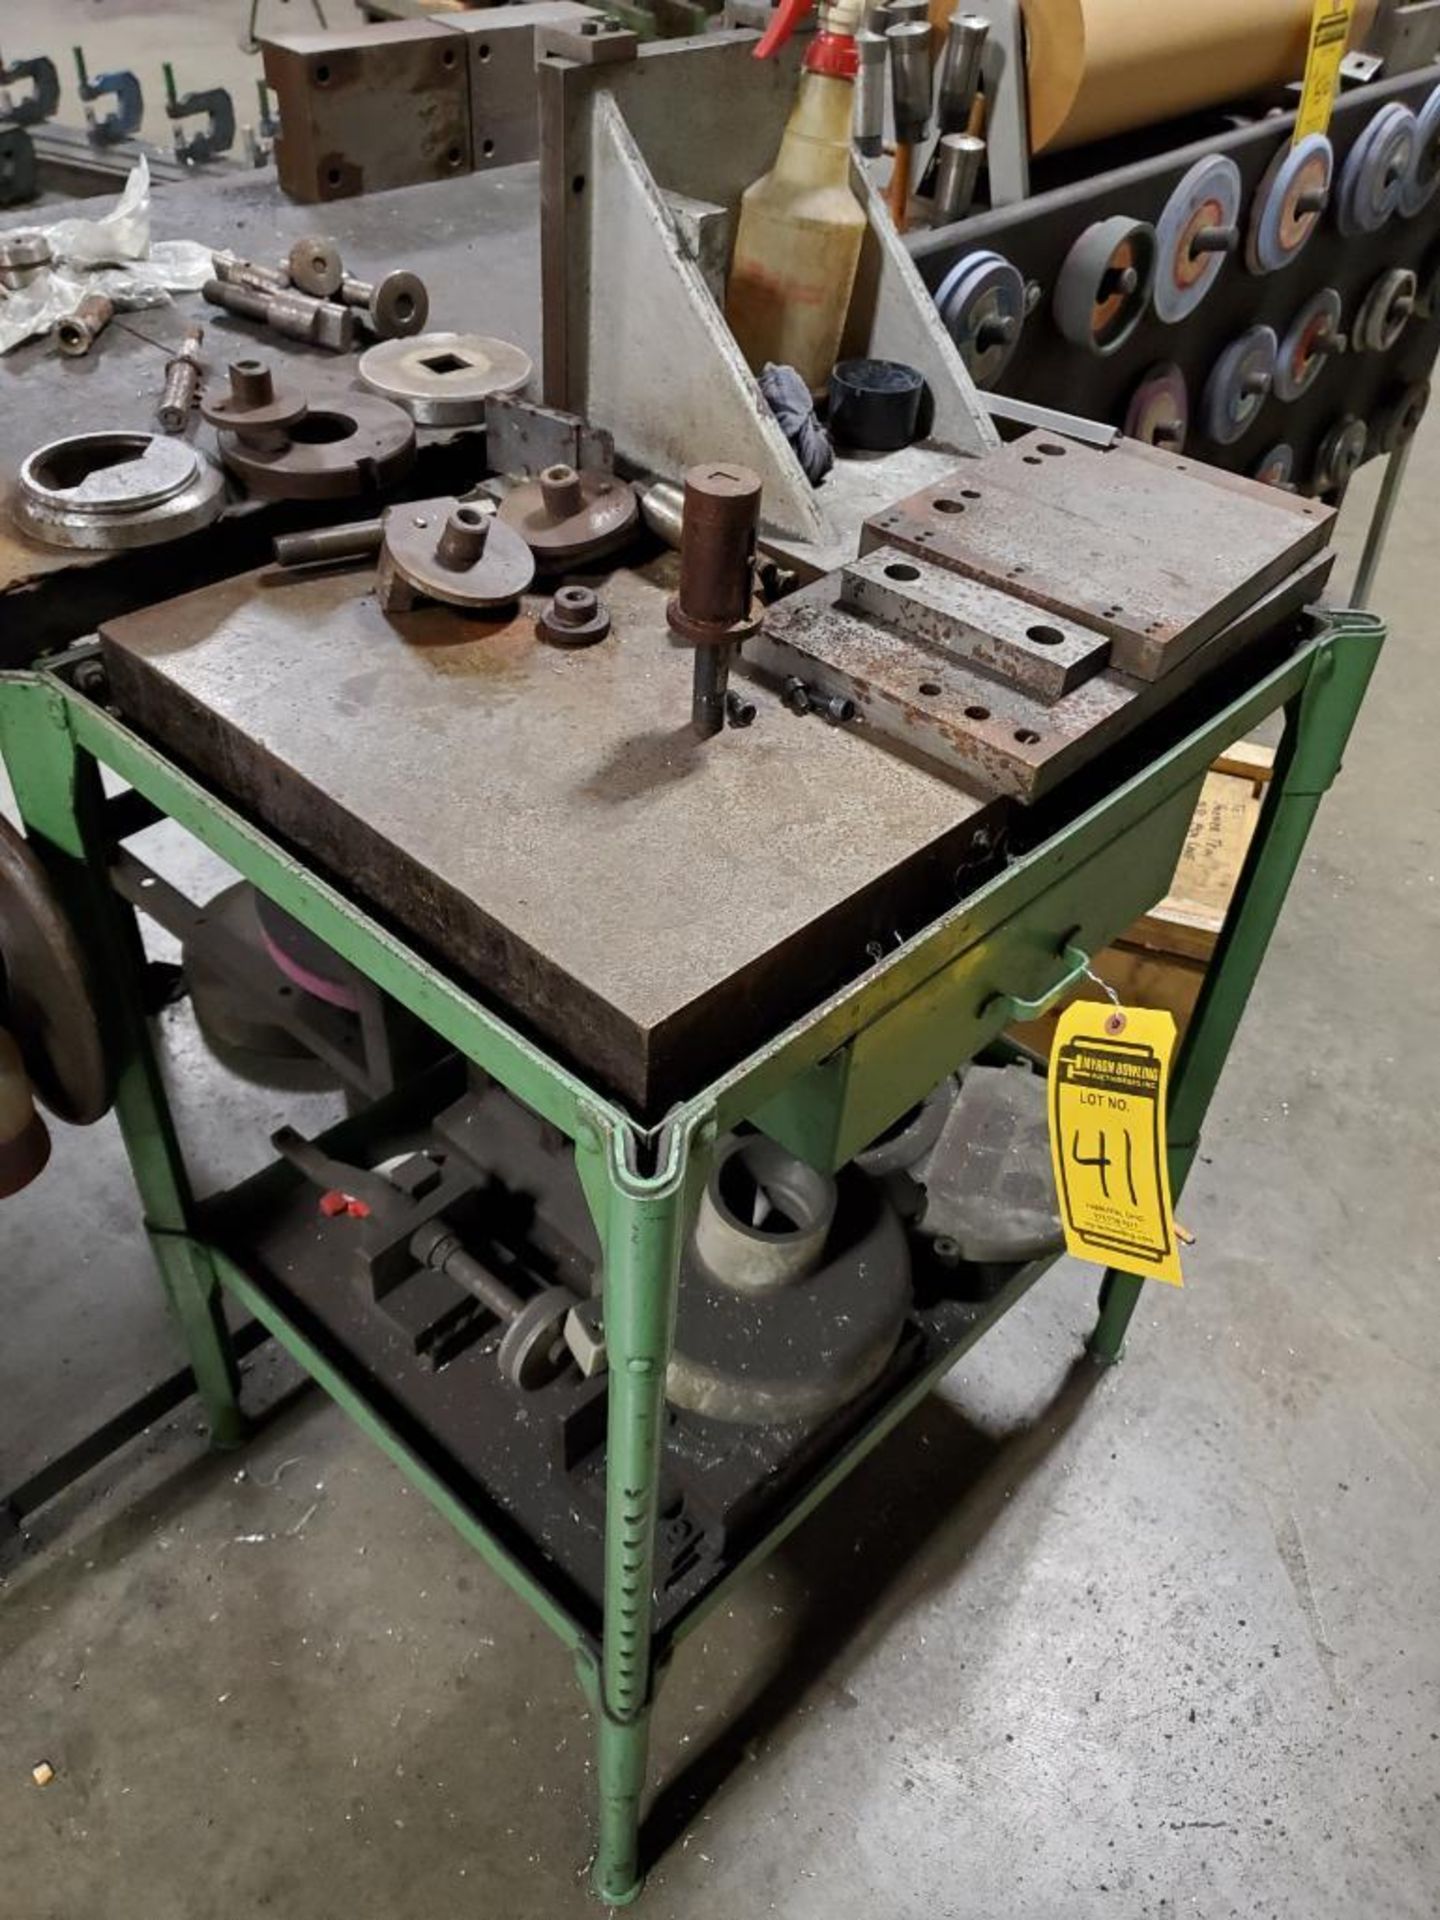 (2) STEEL TABLES, W/ BENCH VISE, ANGLE BLOCKS, EYE BOLTS, PARTS VISES, PERISHABLE TOOLING, & MORE - Image 2 of 10